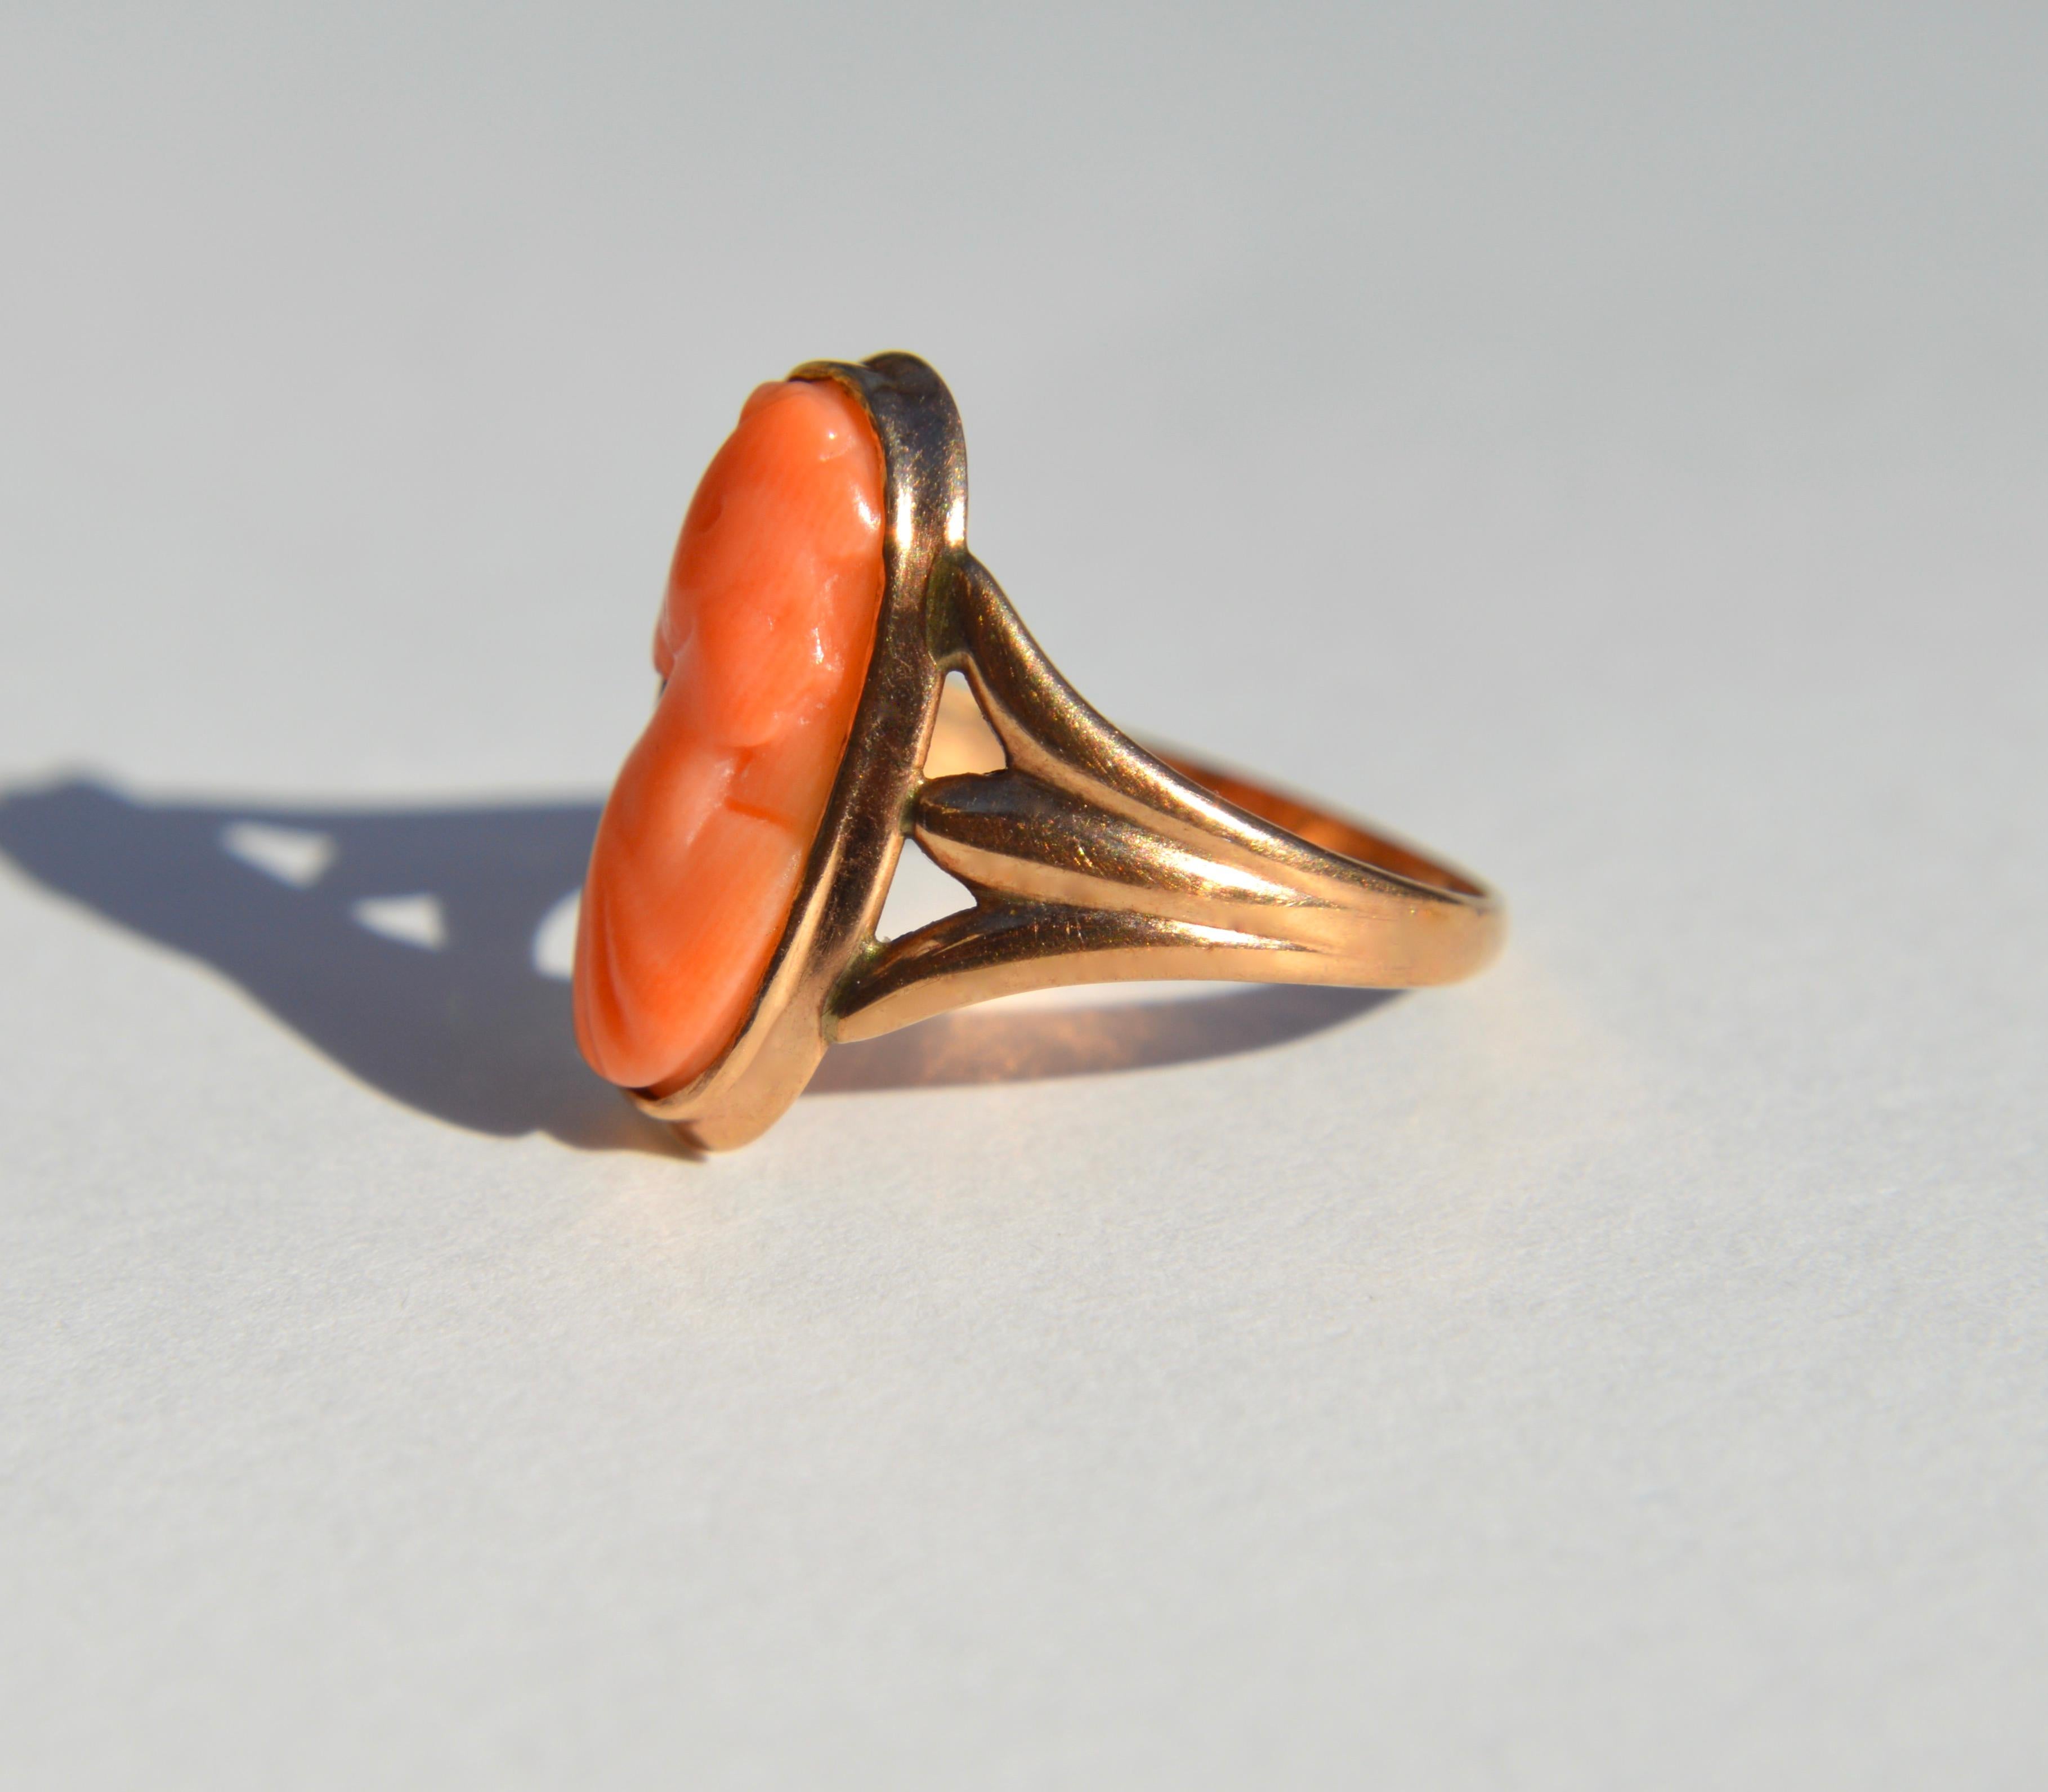 Antique Victorian Era Coral Cameo Portrait 14 Karat Rose Gold Ring In Good Condition For Sale In Crownsville, MD